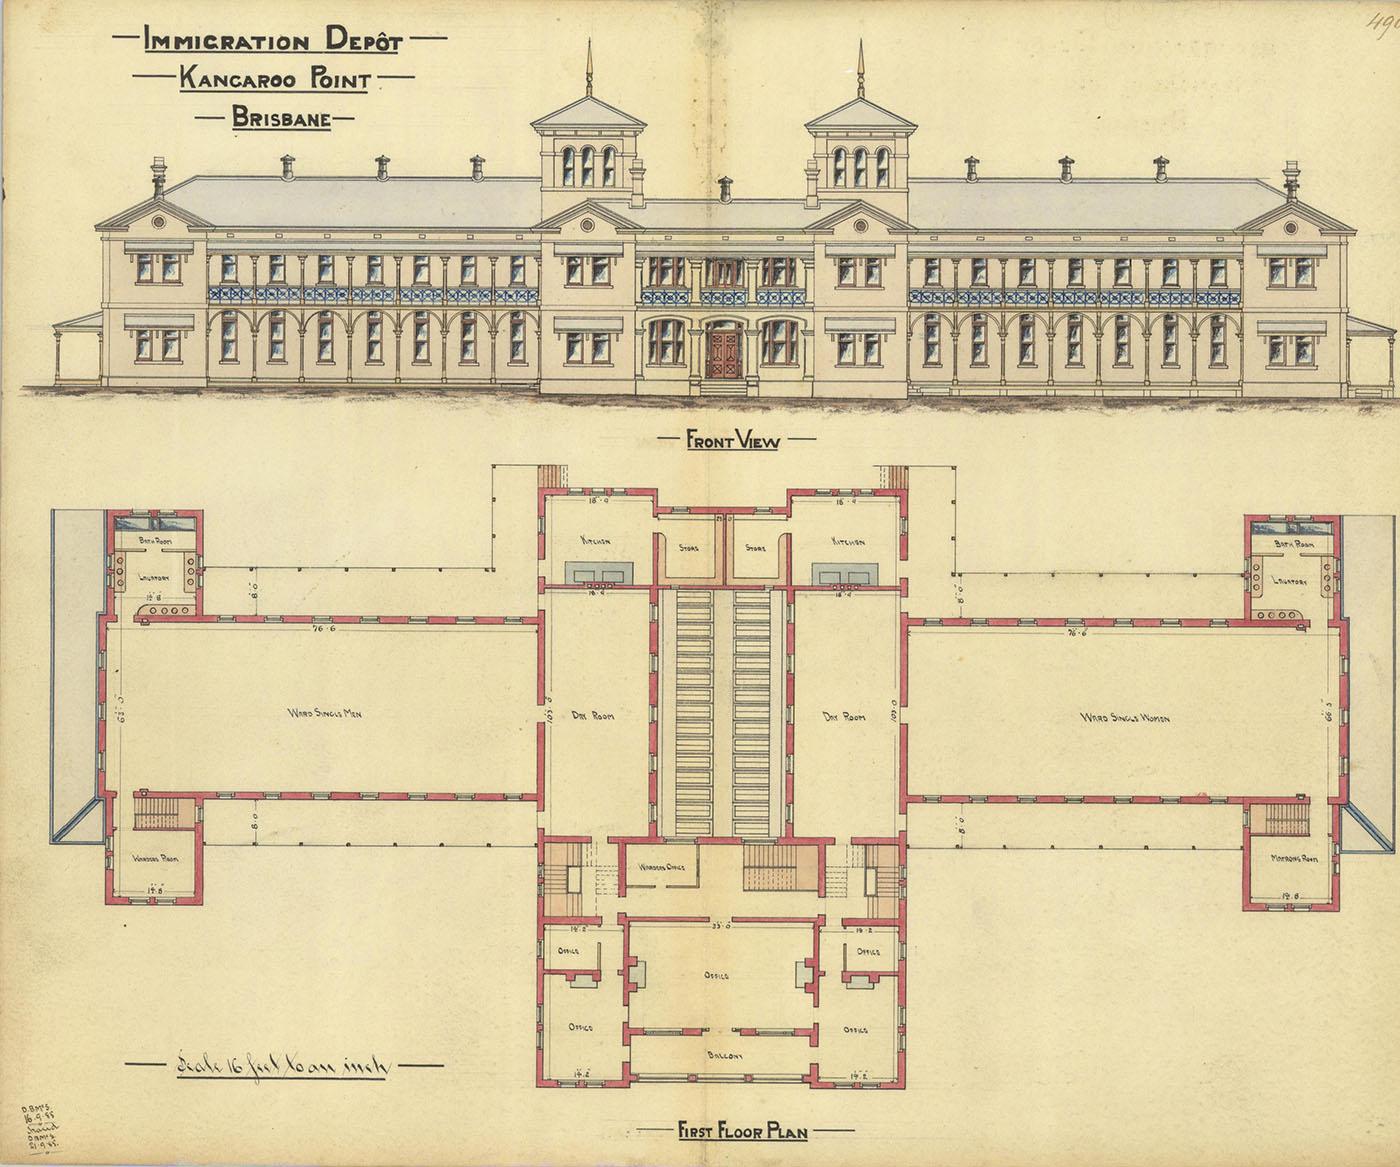 Architectural drawing of the Yungaba Immigration Depot 